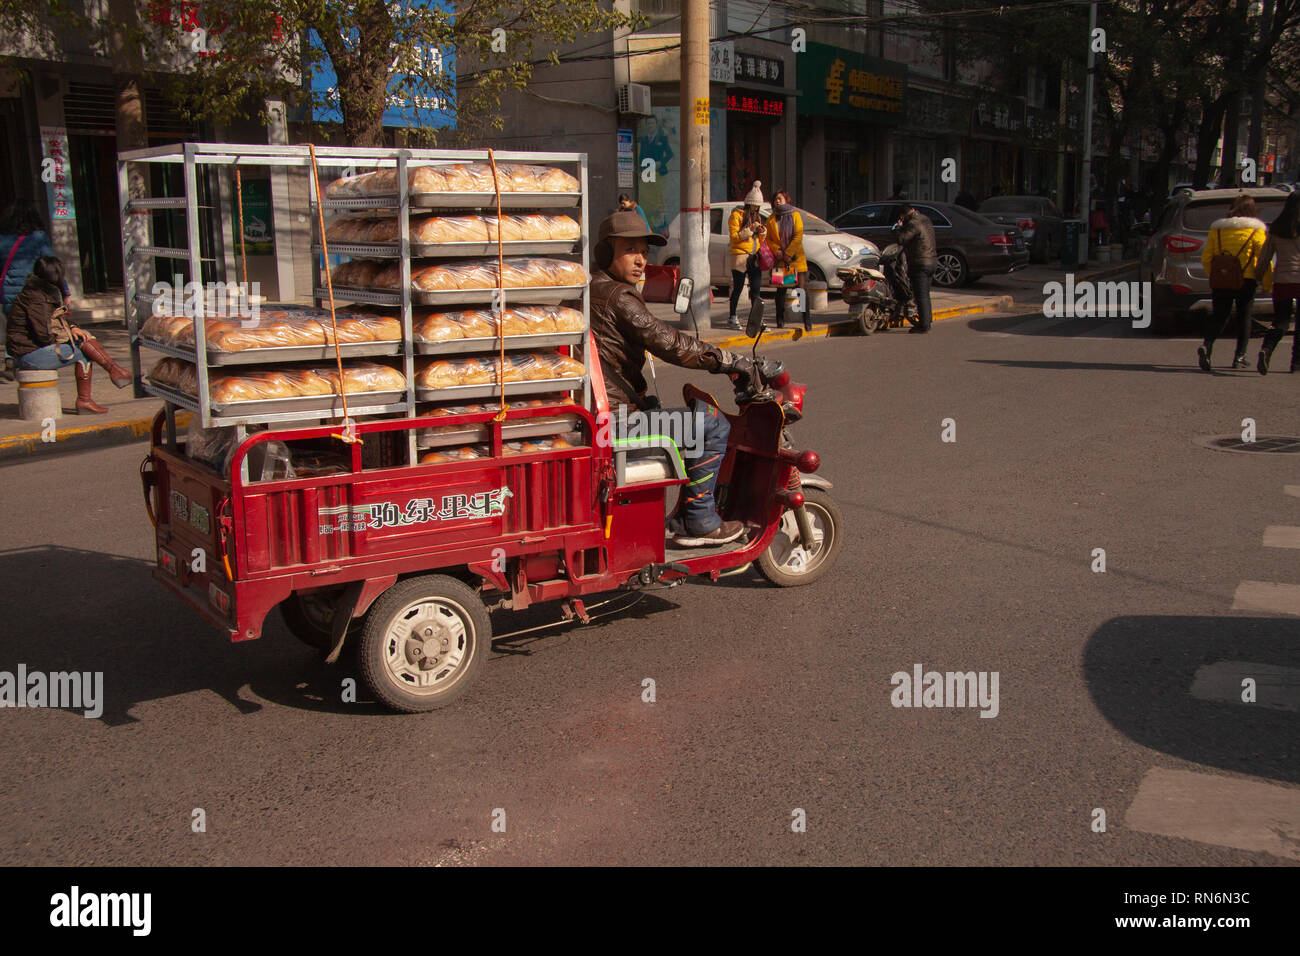 Chinese man riding a cargo moped loaded with bread from a baker in a street in China. Cargo bikes or freight mopeds are popular transport in China. Be Stock Photo